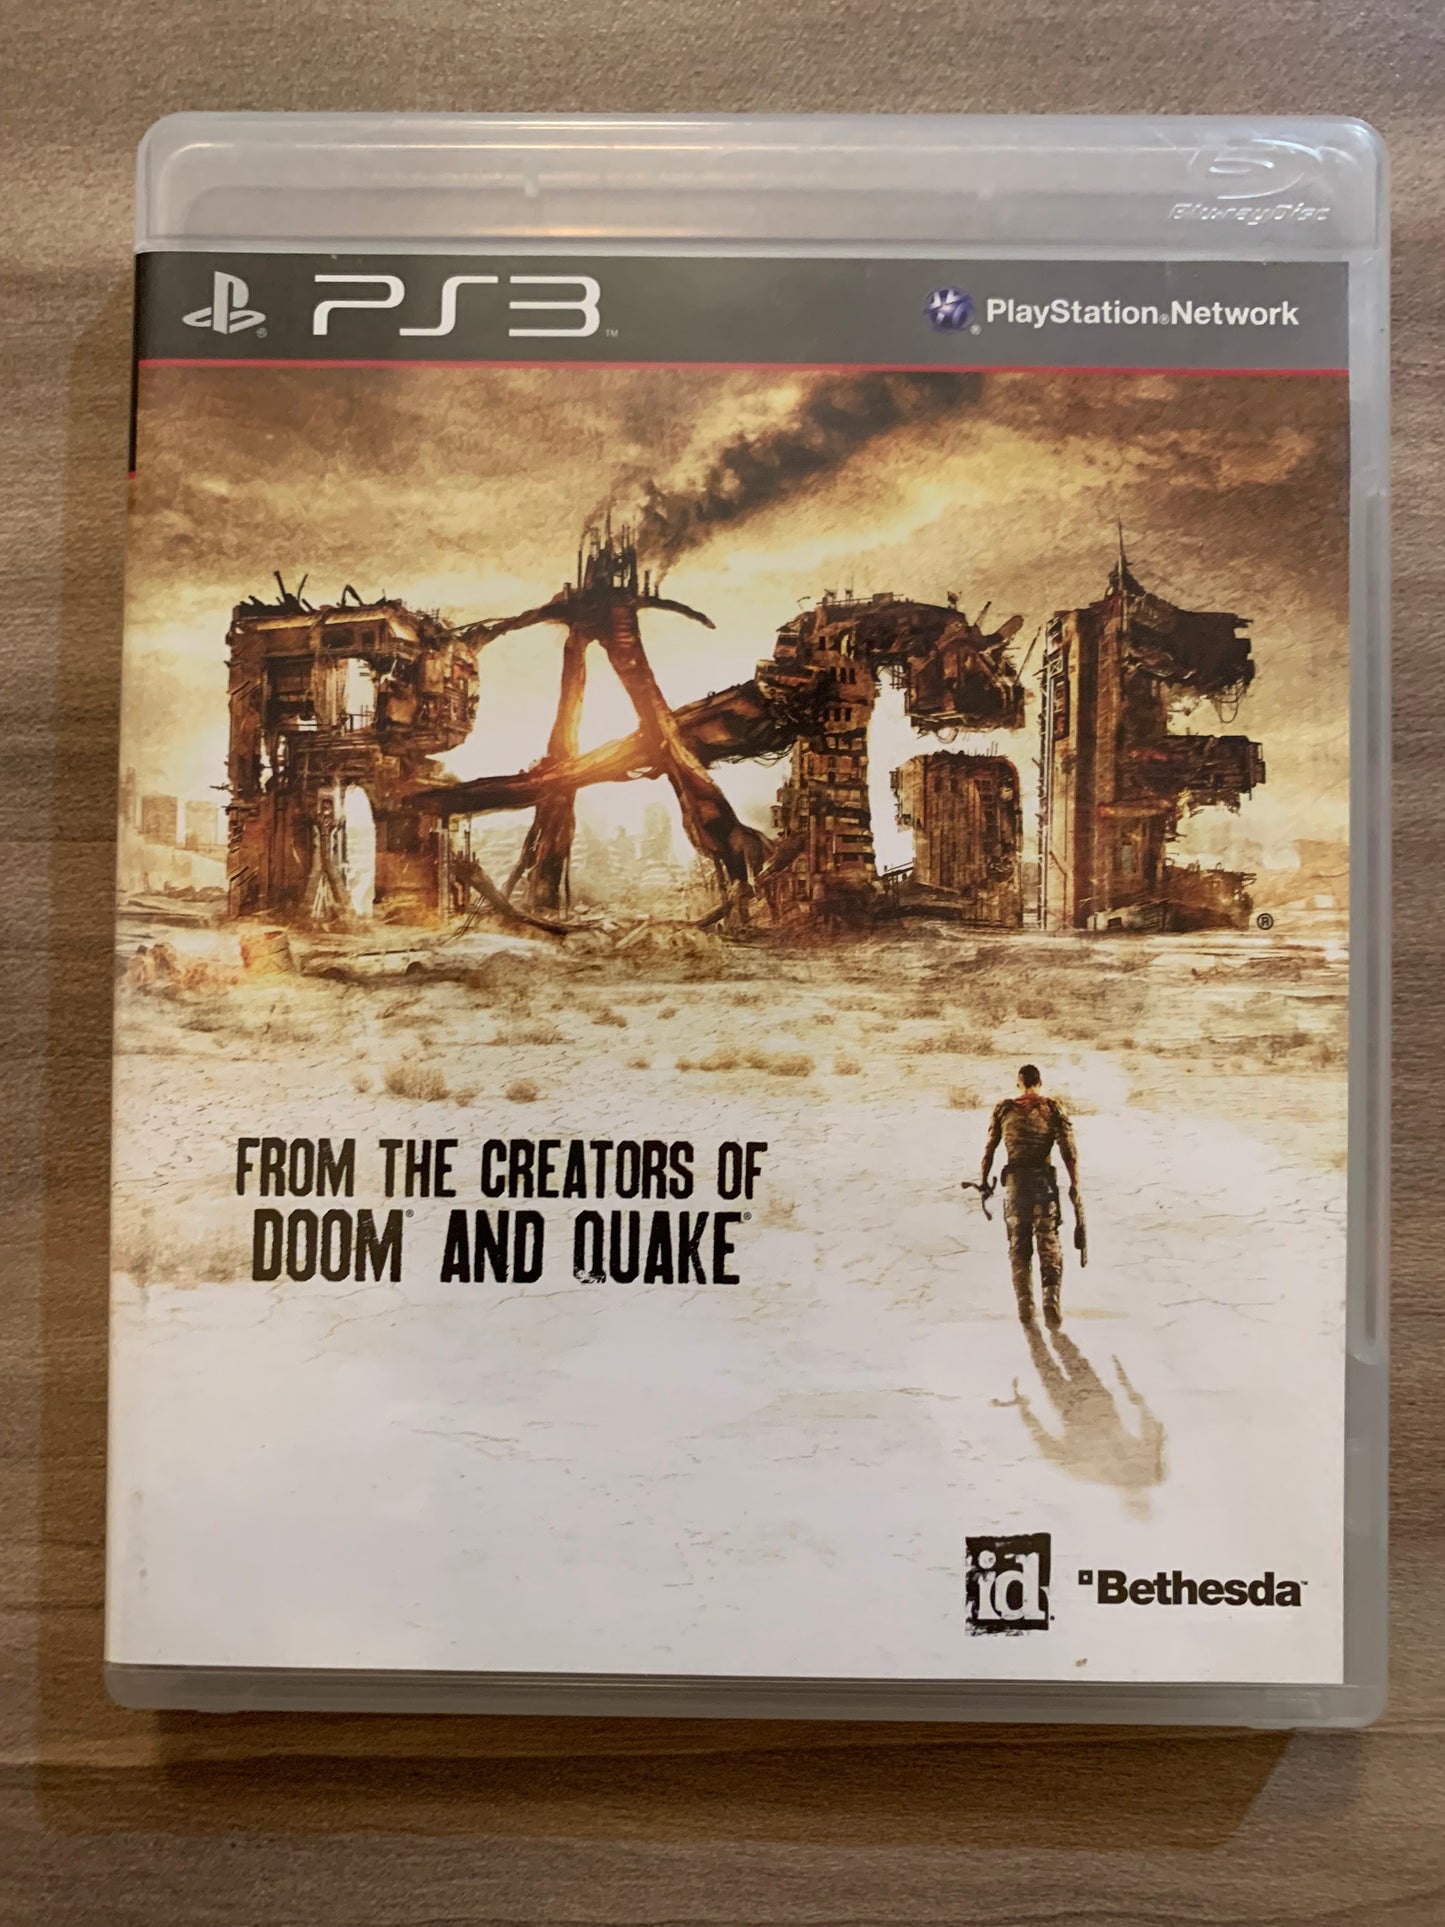 SONY PLAYSTATiON 3 [PS3] | RAGE